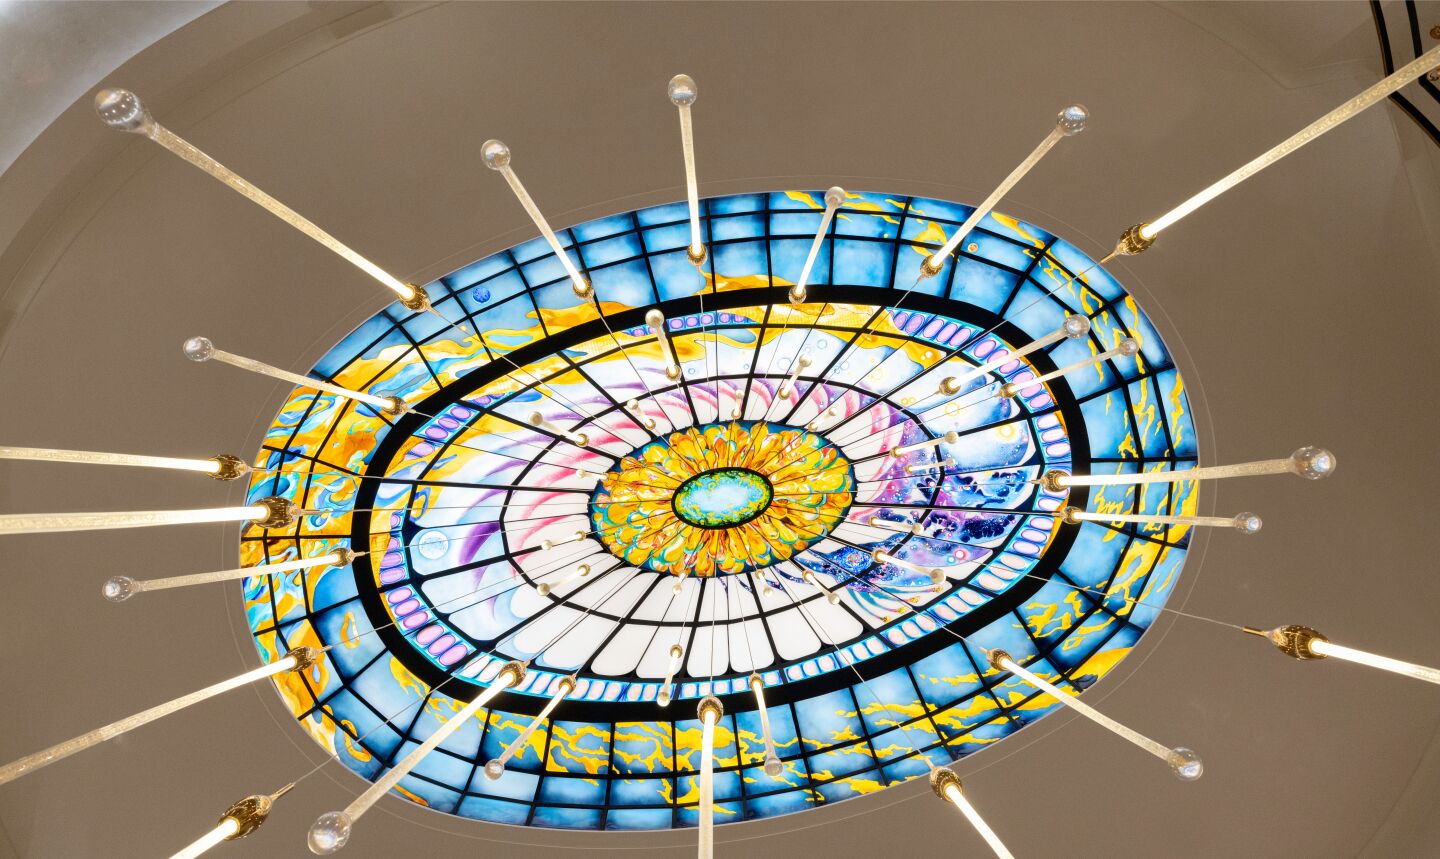 The stained glass dome.